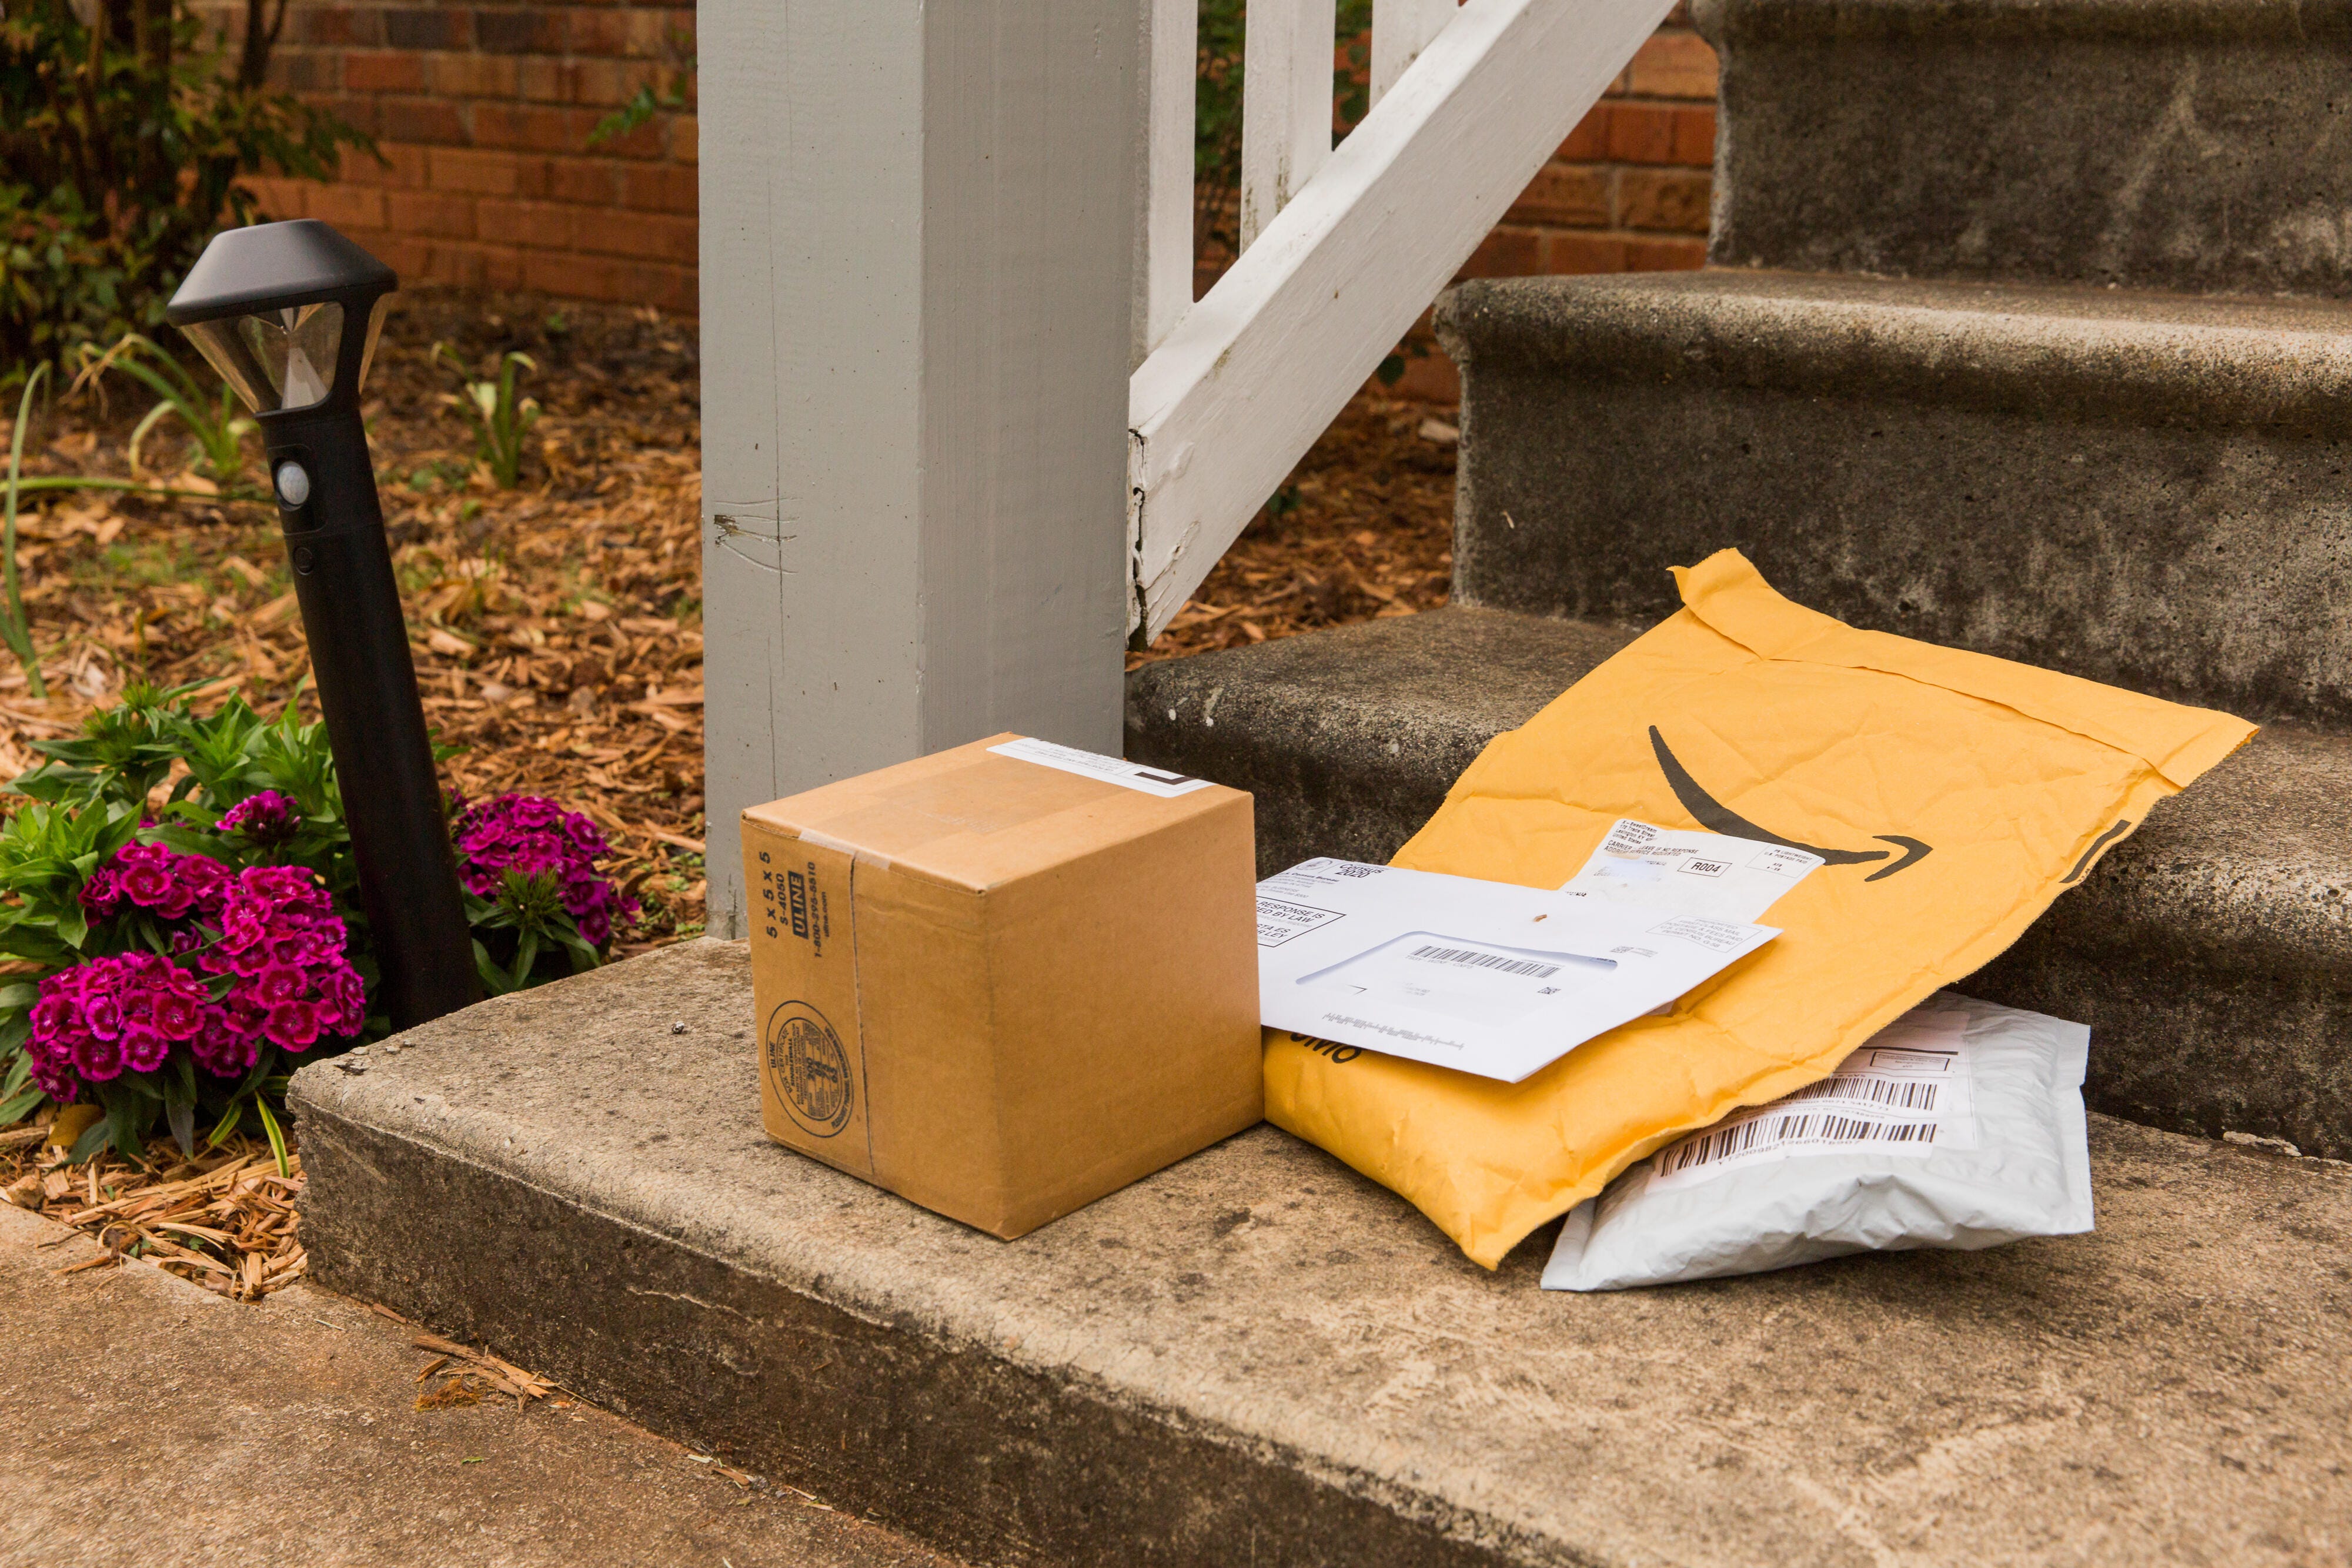 08-mail-packages-usps-fedex-amazon-ups-doorstep-mailbox-letters-shipping-coronavirus-sta-at-home-2020-cnet